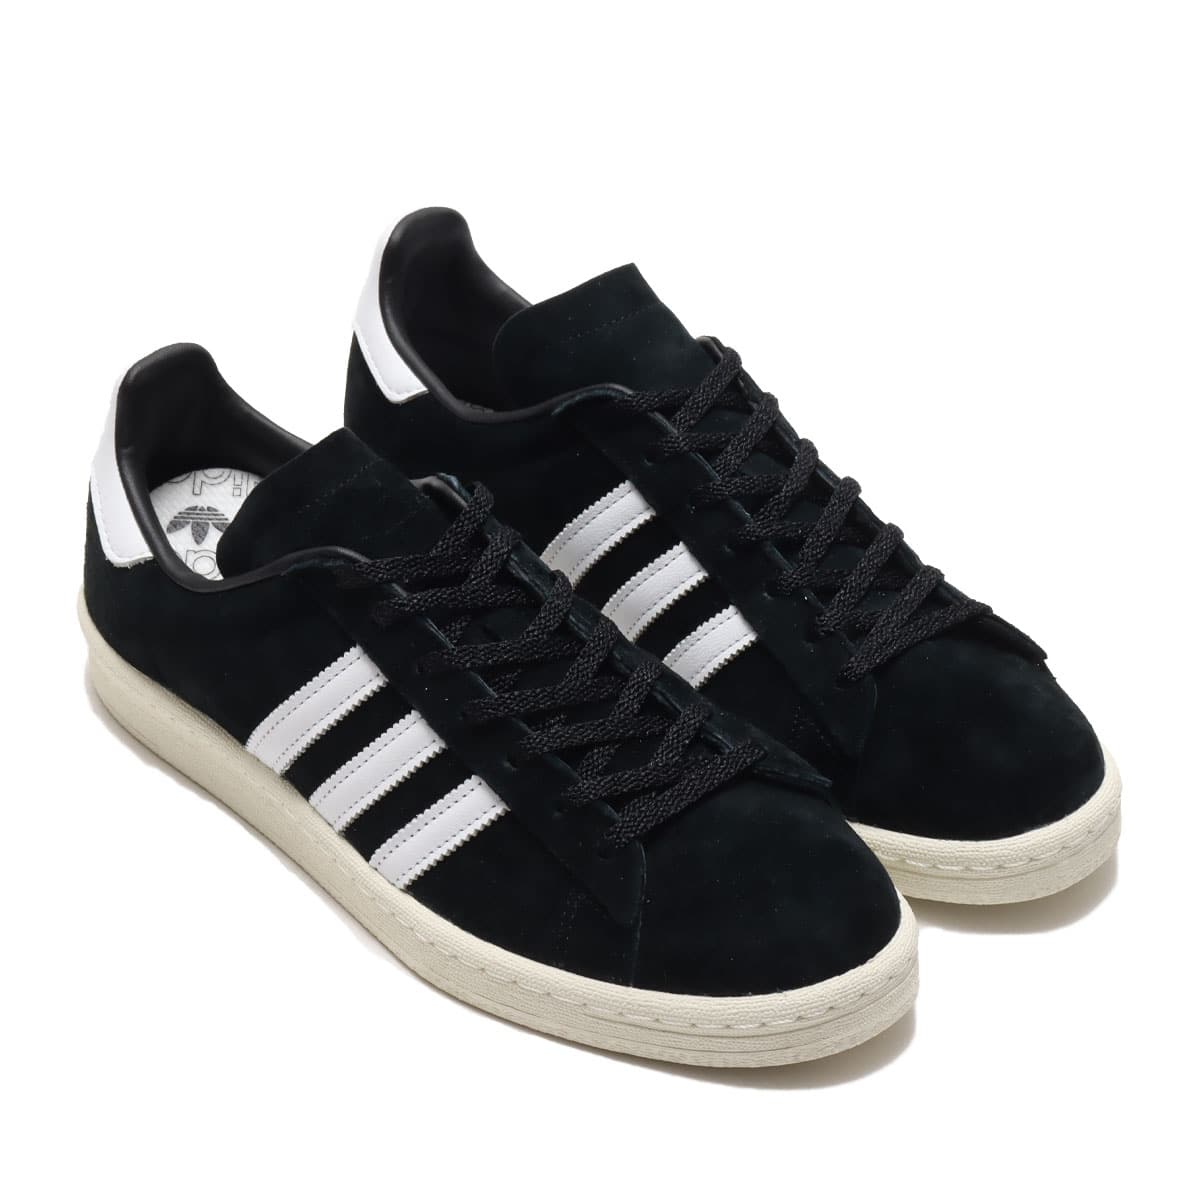 adidas CAMPUS 80s CORE BLACK/FOOTWEAR WHITE/OFF WHITE 21SS-I